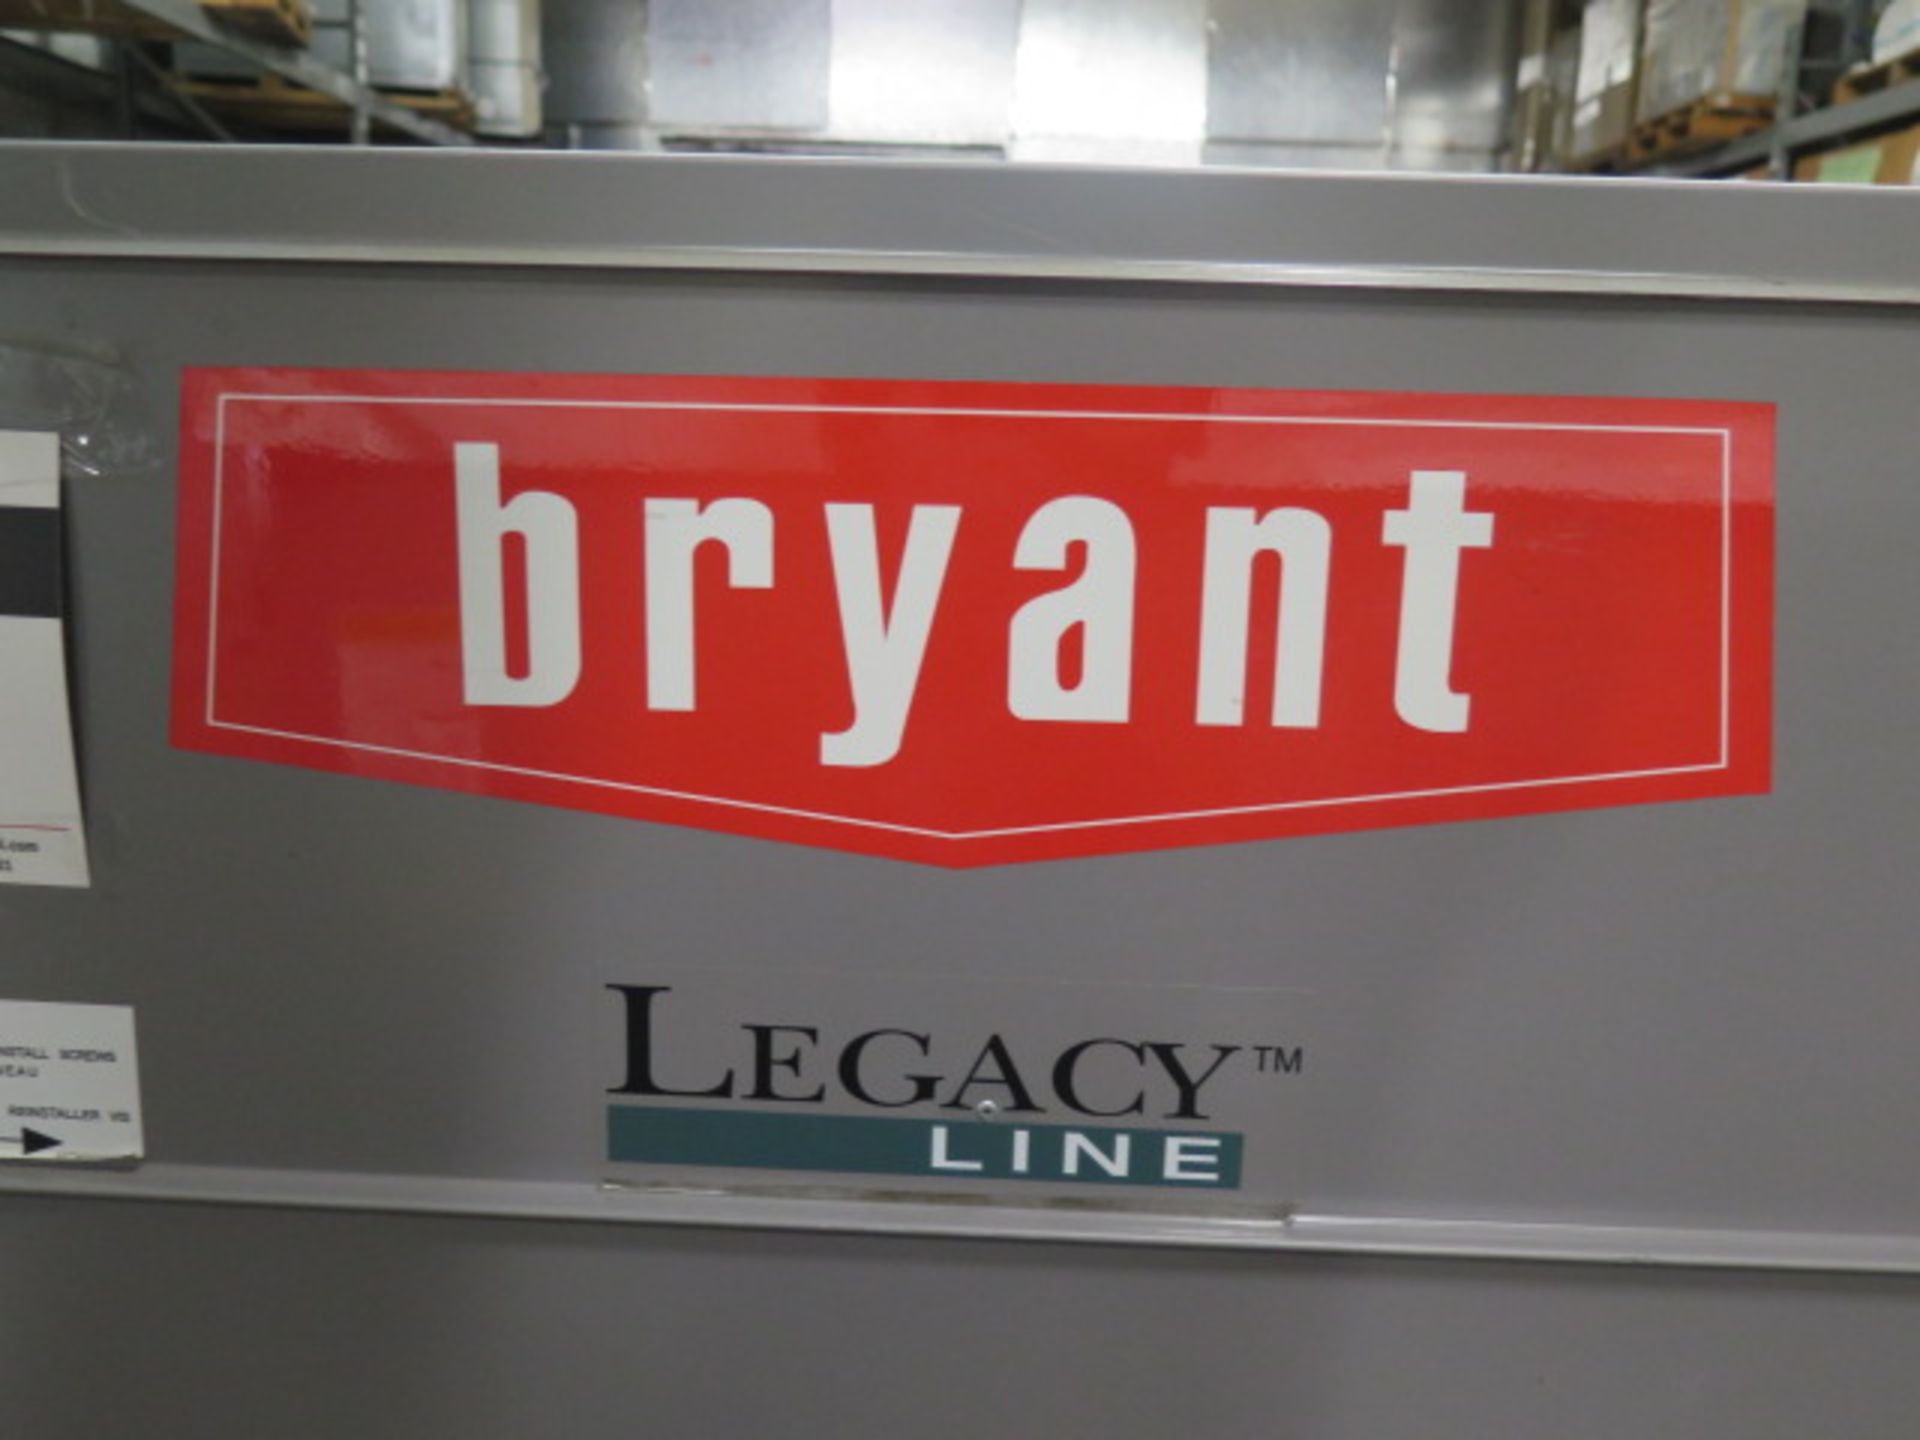 Bryant “Legacy Line” 580JP06B060A2A0AAA 3 Ton Gas Electric Unit 208/230V-3ph - Image 5 of 6